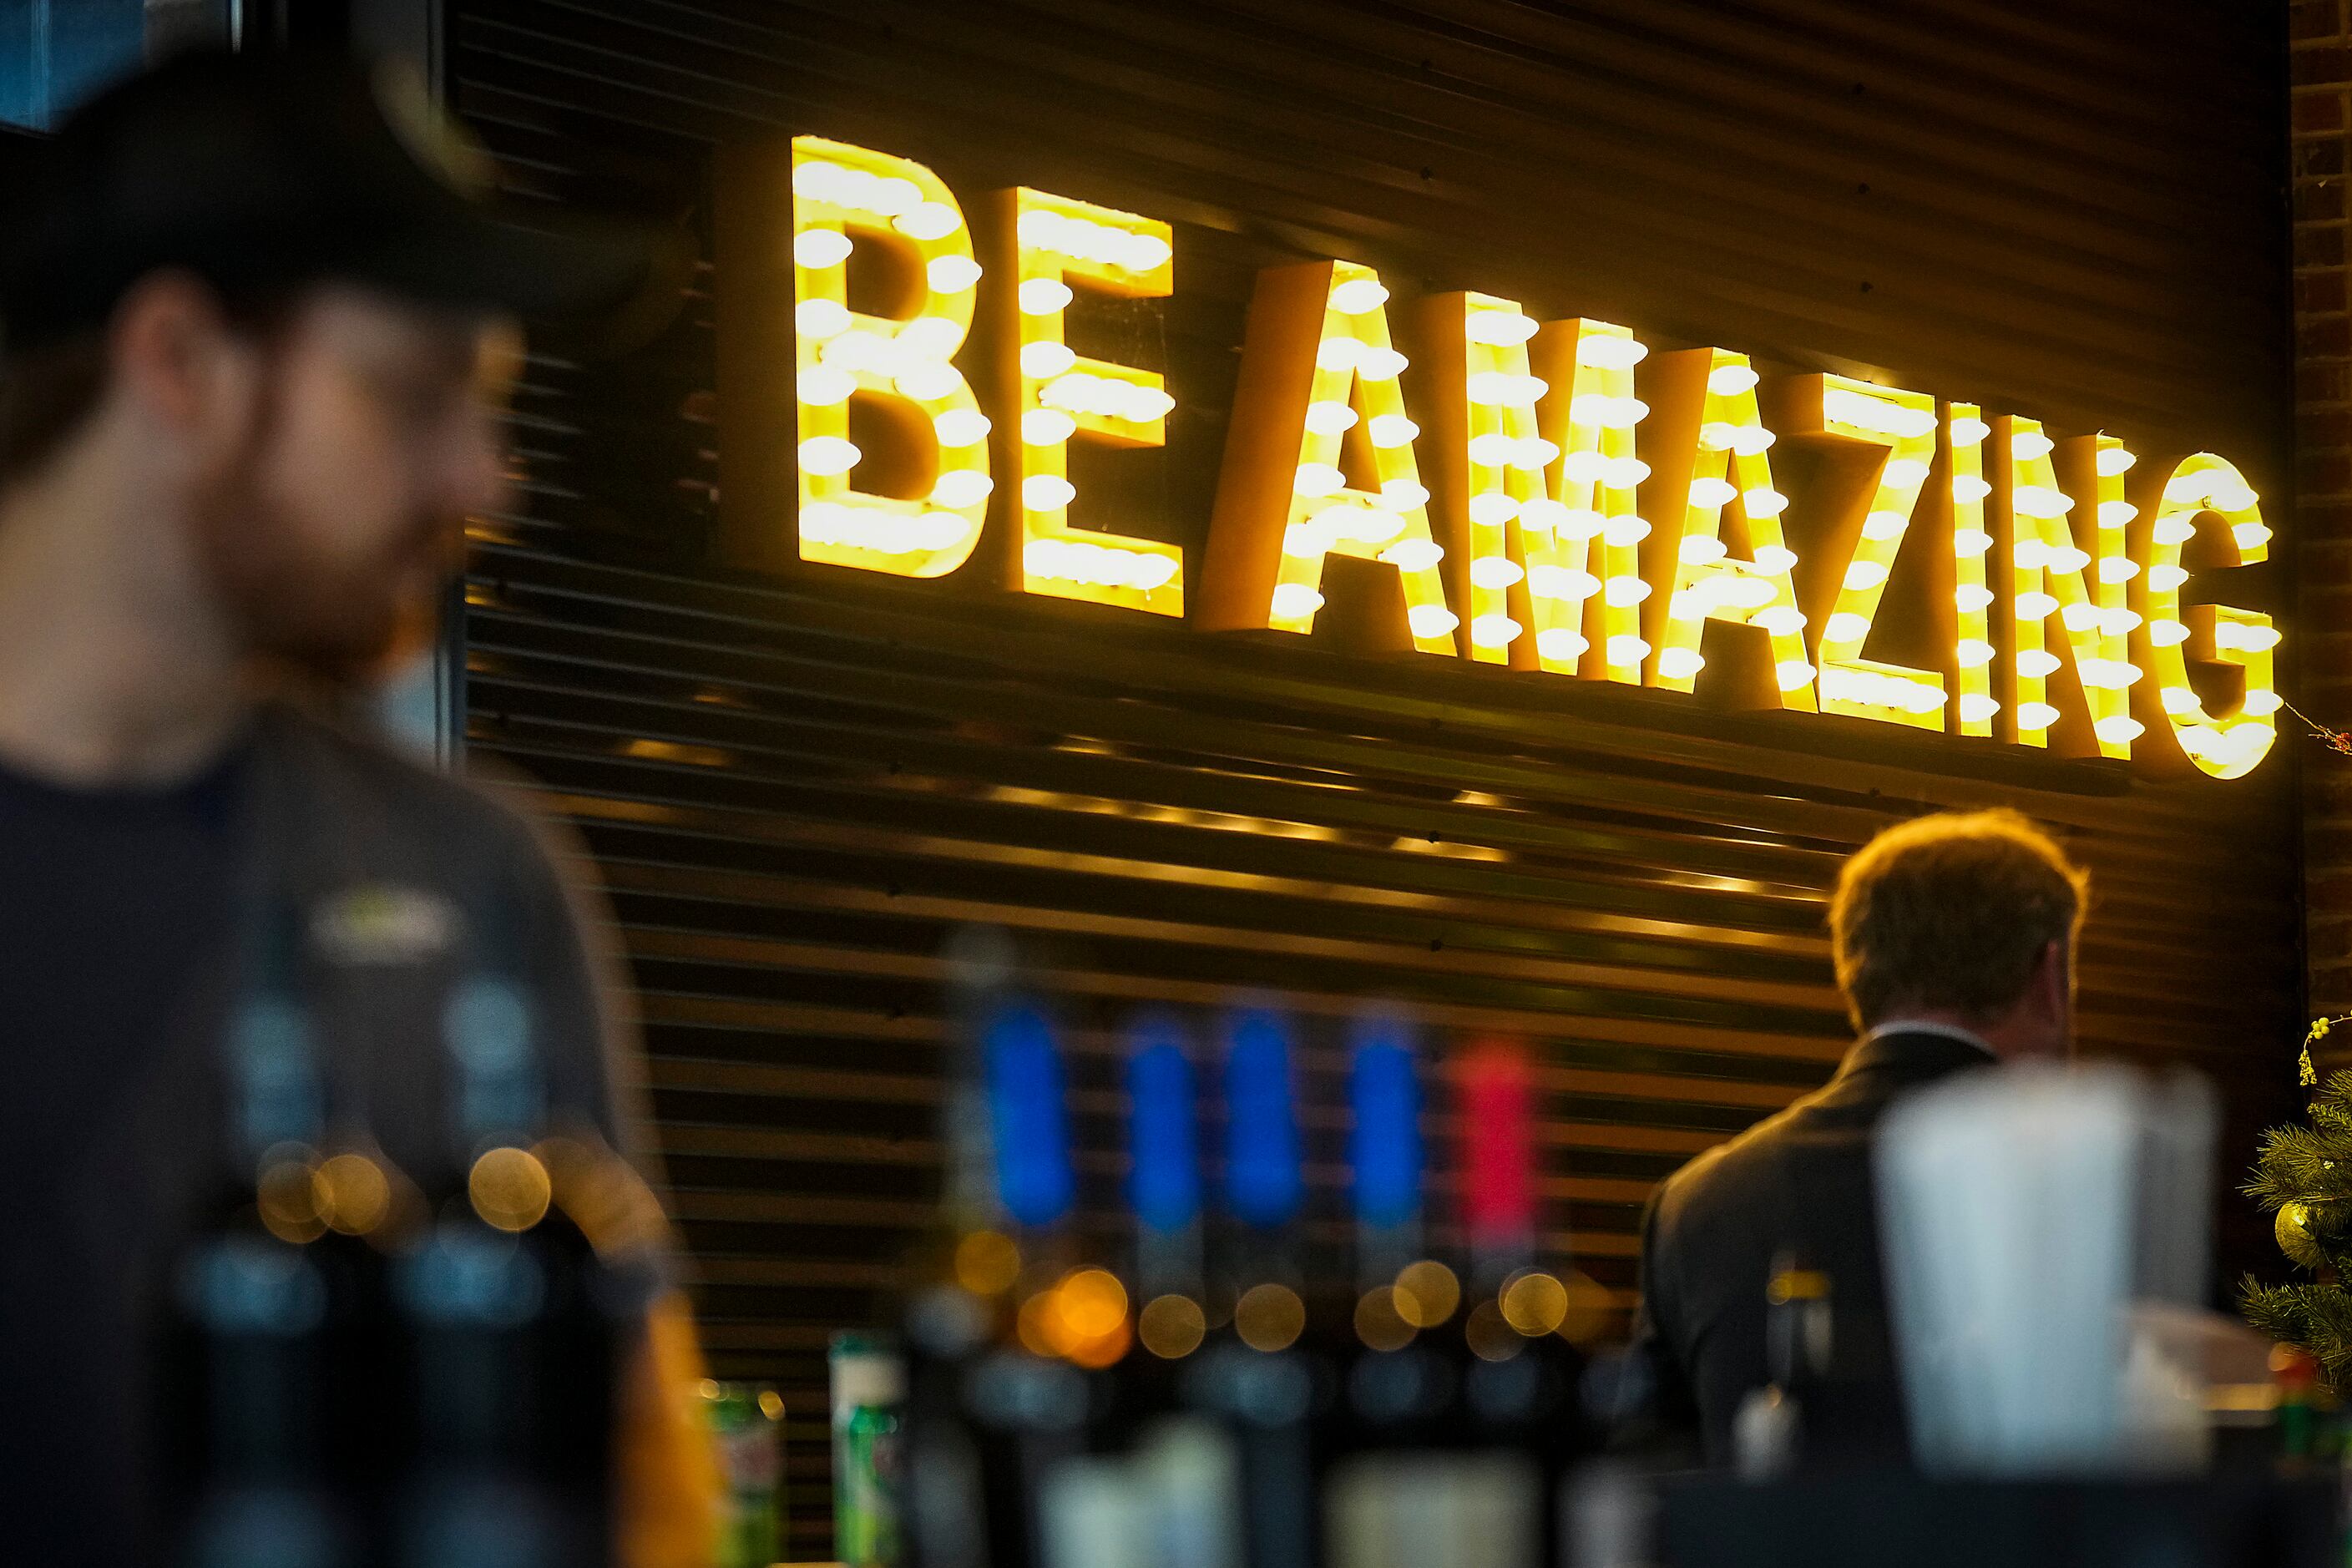 A sign in a bar area reads “Be Amazing” at Chicken N Pickle on Friday, Dec. 9, 2022, in...